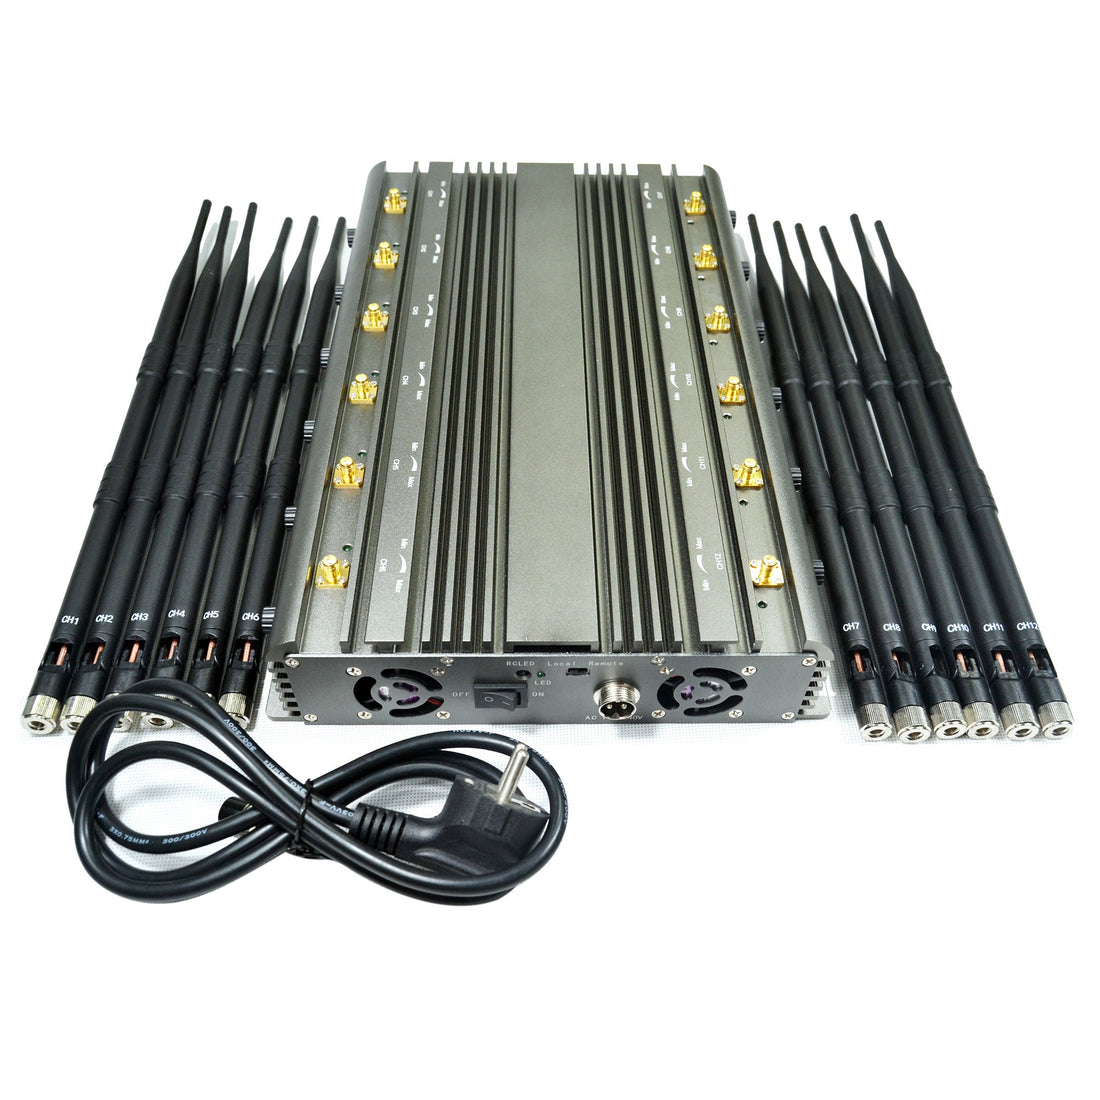 How to install the cell phone signal jammer?